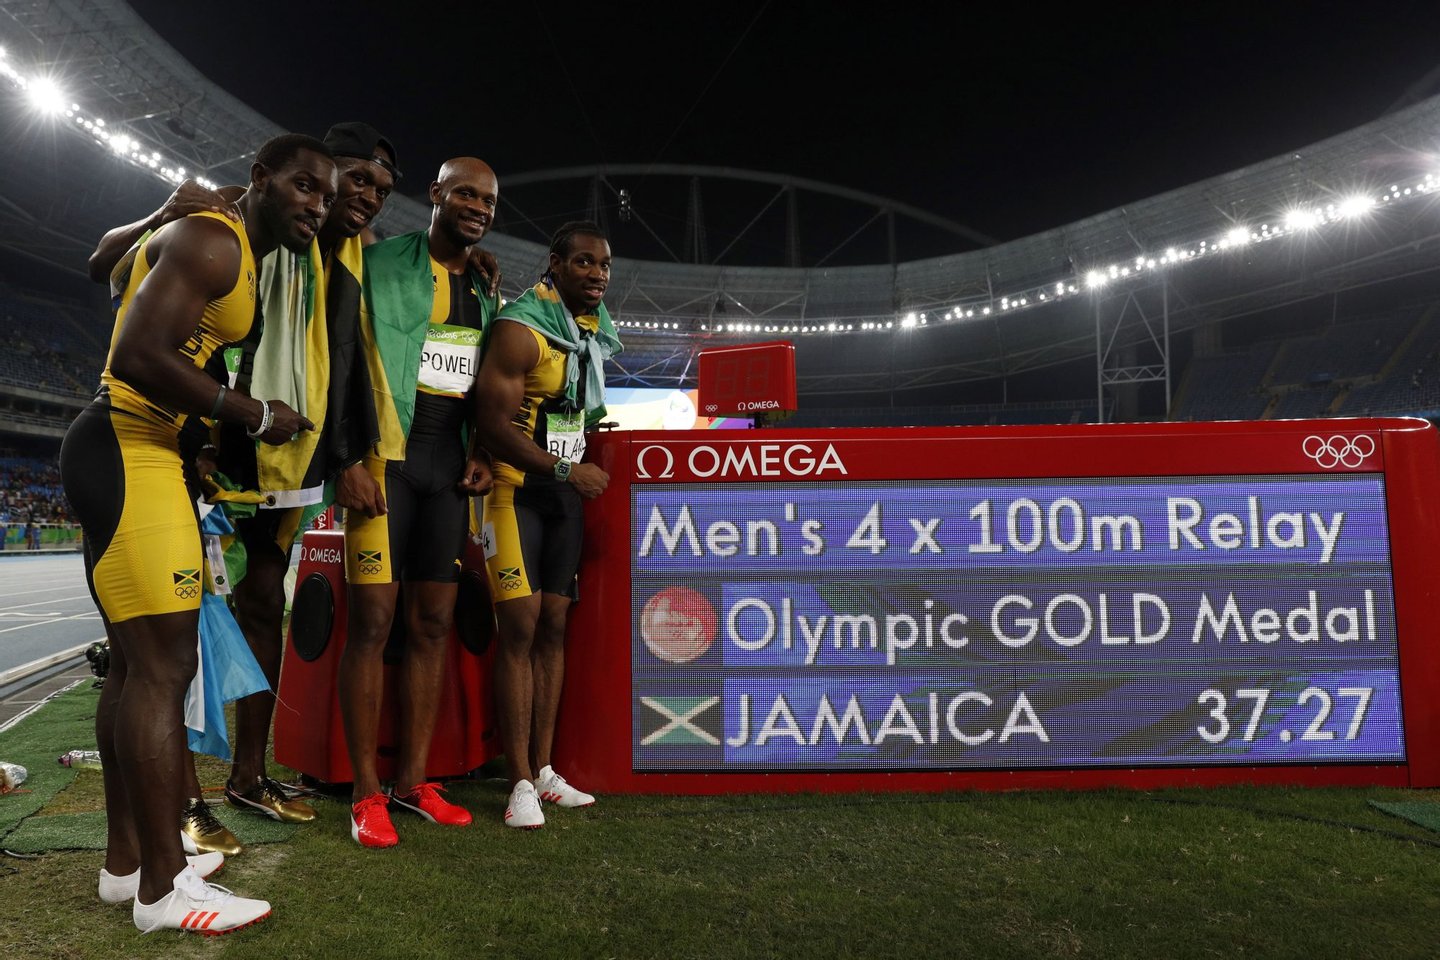 Team Jamaica (LtoR) Jamaica's Nickel Ashmeade, Jamaica's Usain Bolt, Jamaica's Asafa Powell and Jamaica's Yohan Blake celebrate after winning the Men's 4x100m Relay Final during the athletics event at the Rio 2016 Olympic Games at the Olympic Stadium in Rio de Janeiro on August 19, 2016. / AFP / Adrian DENNIS (Photo credit should read ADRIAN DENNIS/AFP/Getty Images)